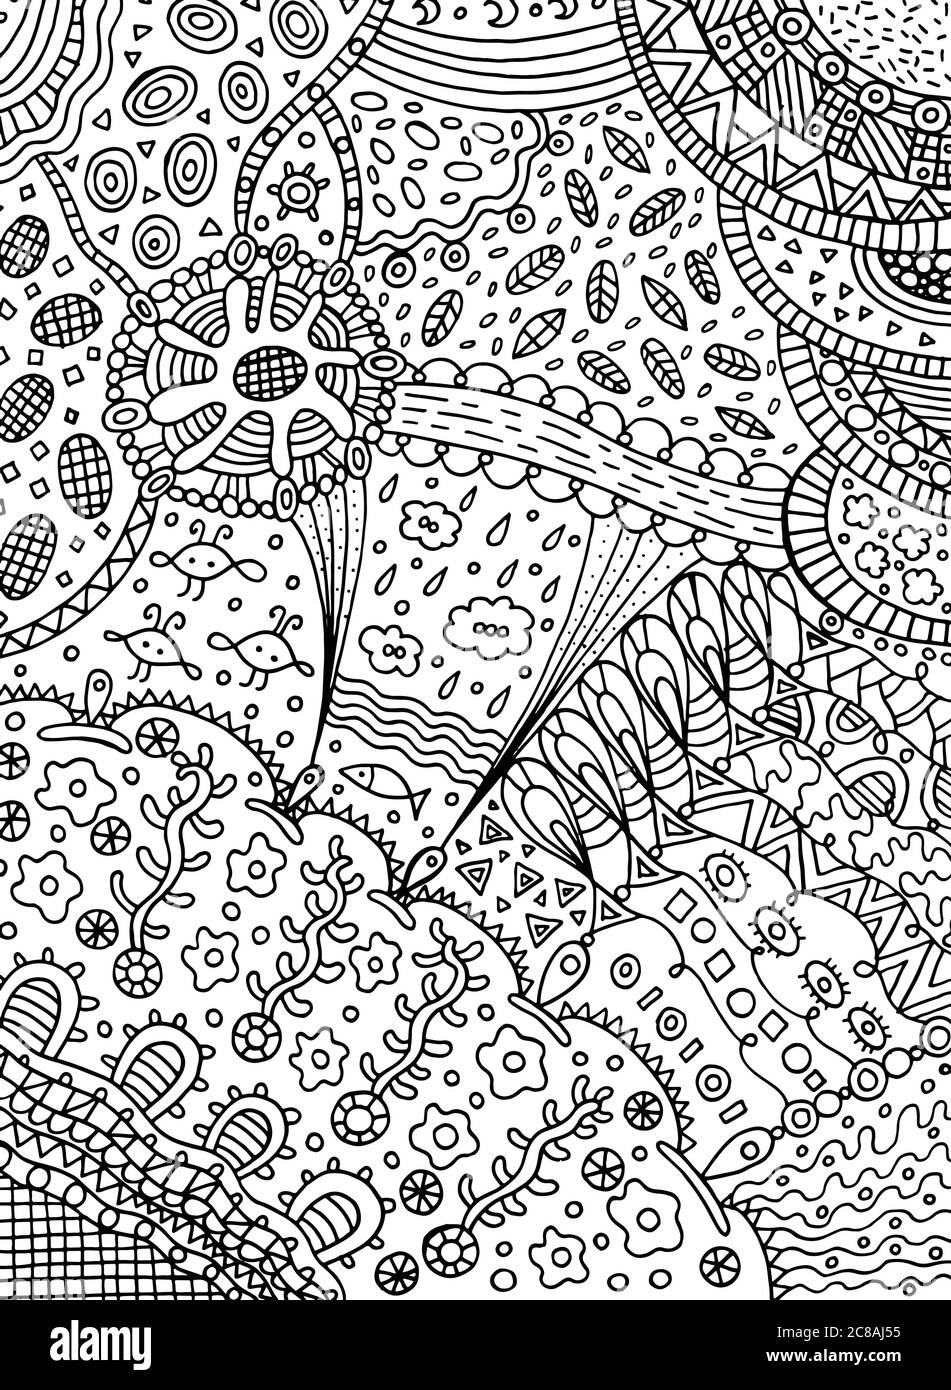 Coloring page in doodle abstract style. Vector art for adult coloring book with nature elements - leaves, clouds, sea Stock Vector